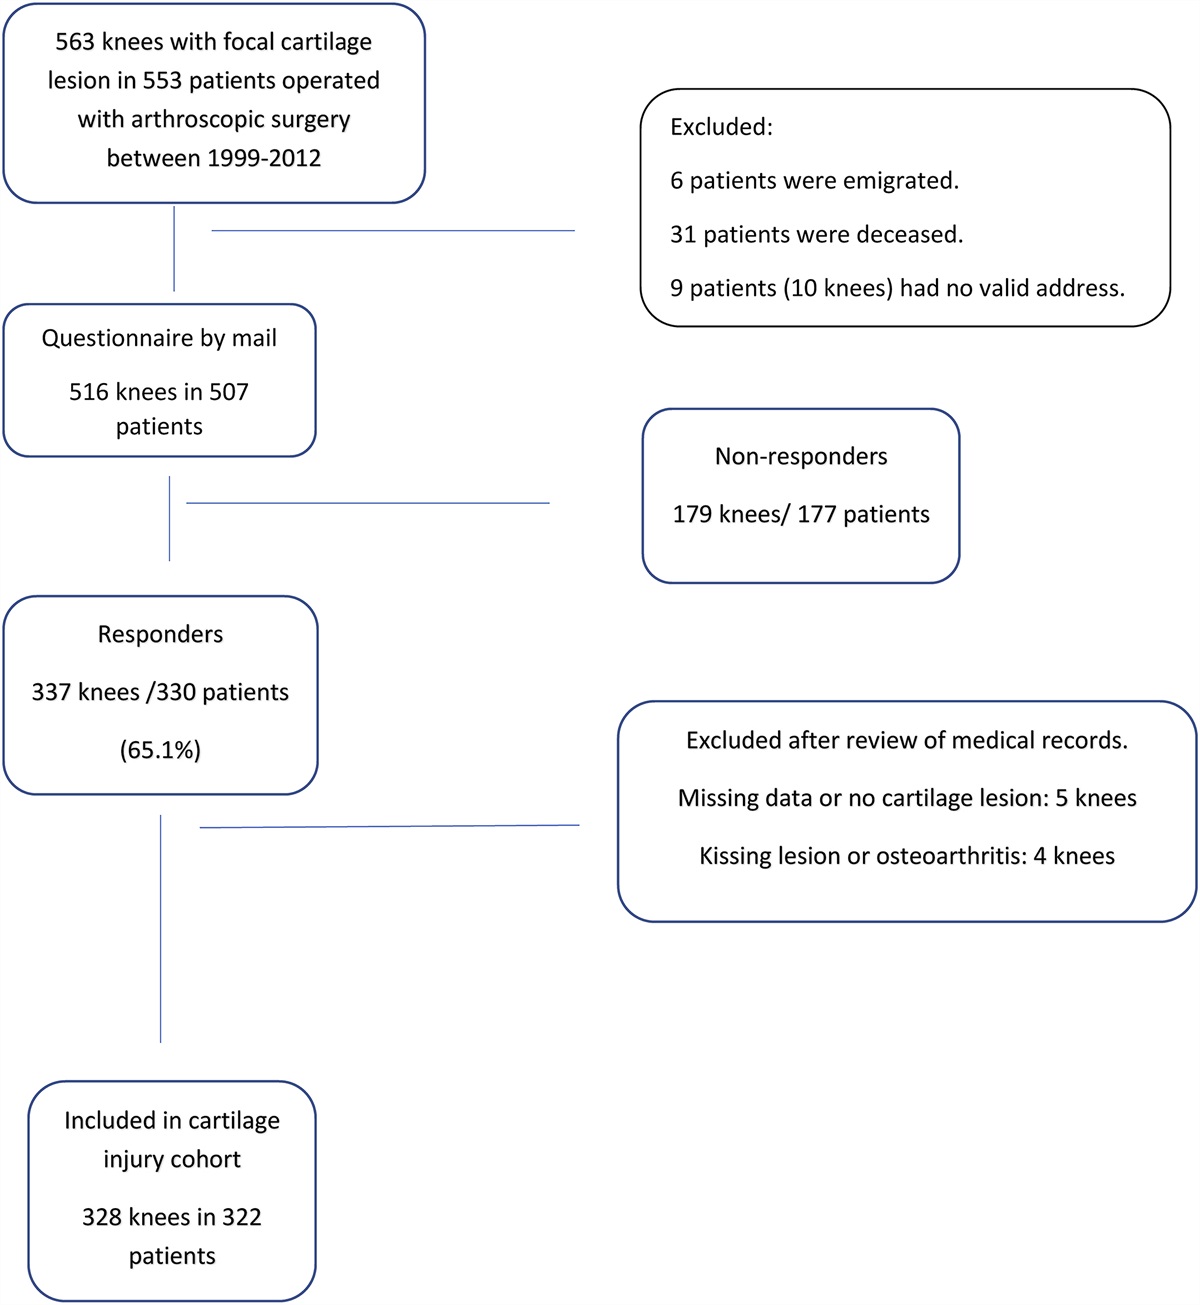 The Long-Term Risk of Knee Arthroplasty in Patients with Arthroscopically Verified Focal Cartilage Lesions: A Linkage Study with the Norwegian Arthroplasty Register, 1999 to 2020